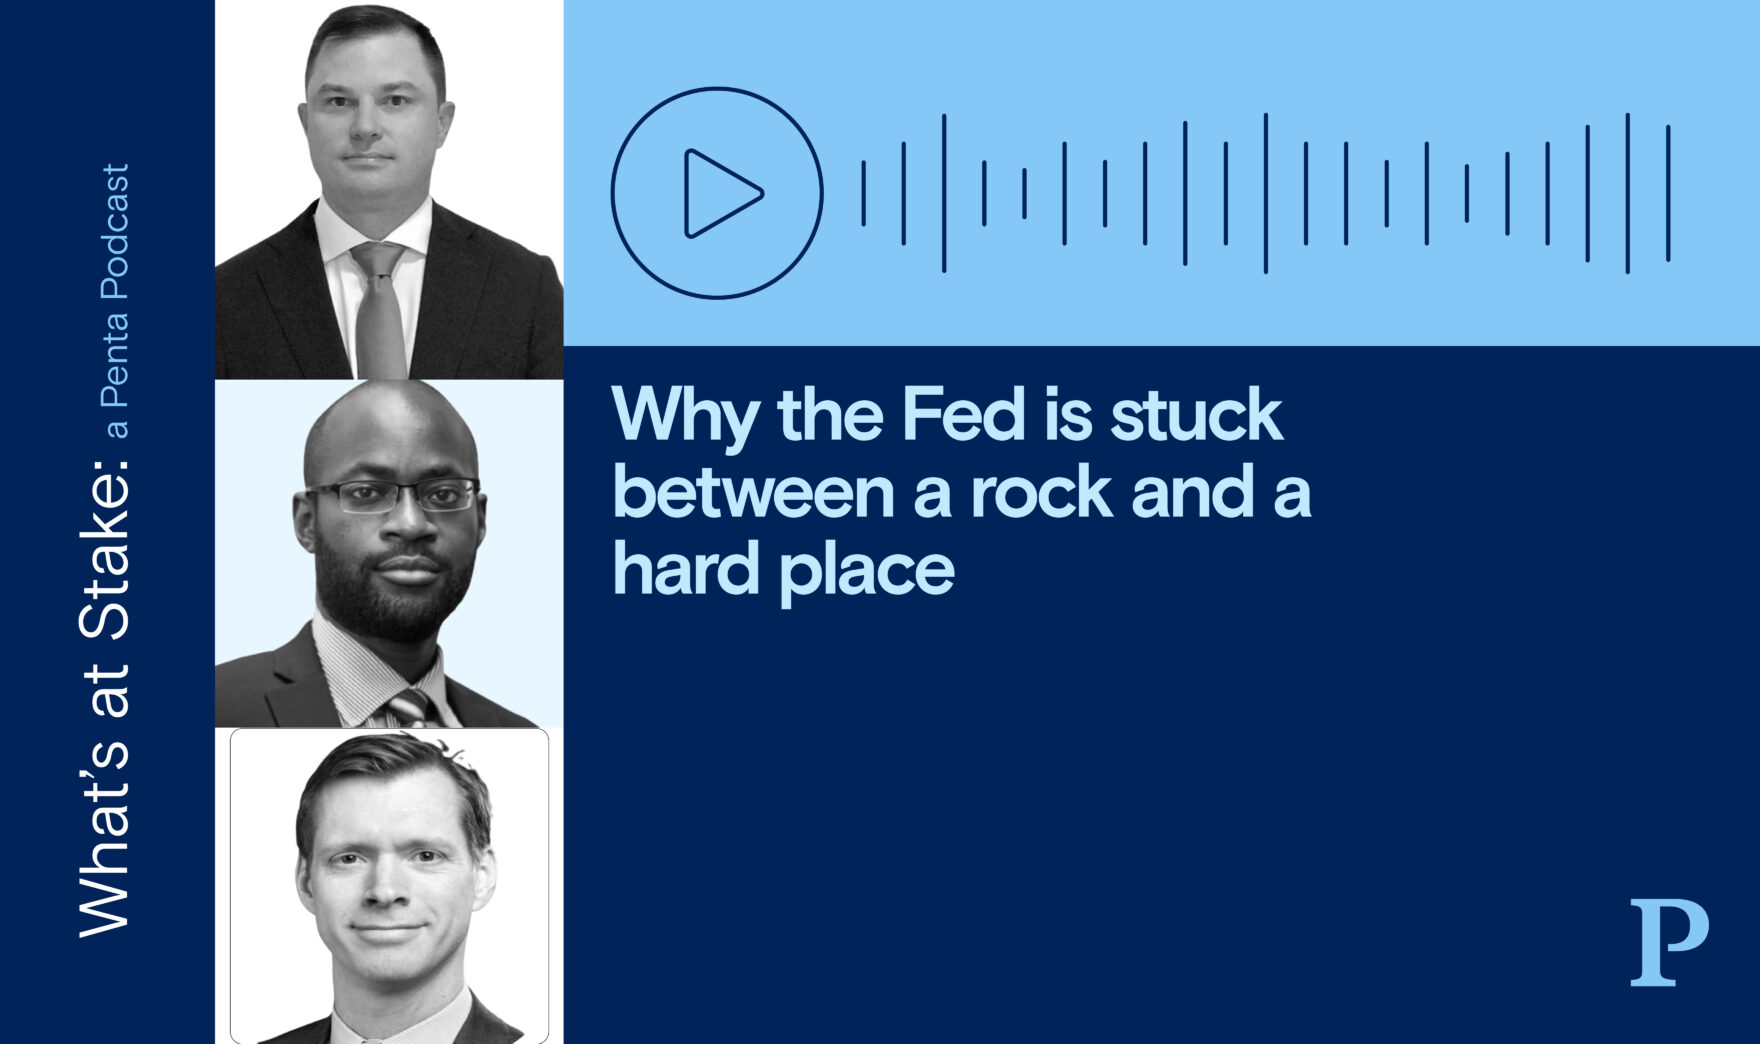 Why the Fed is stuck between a rock and a hard place